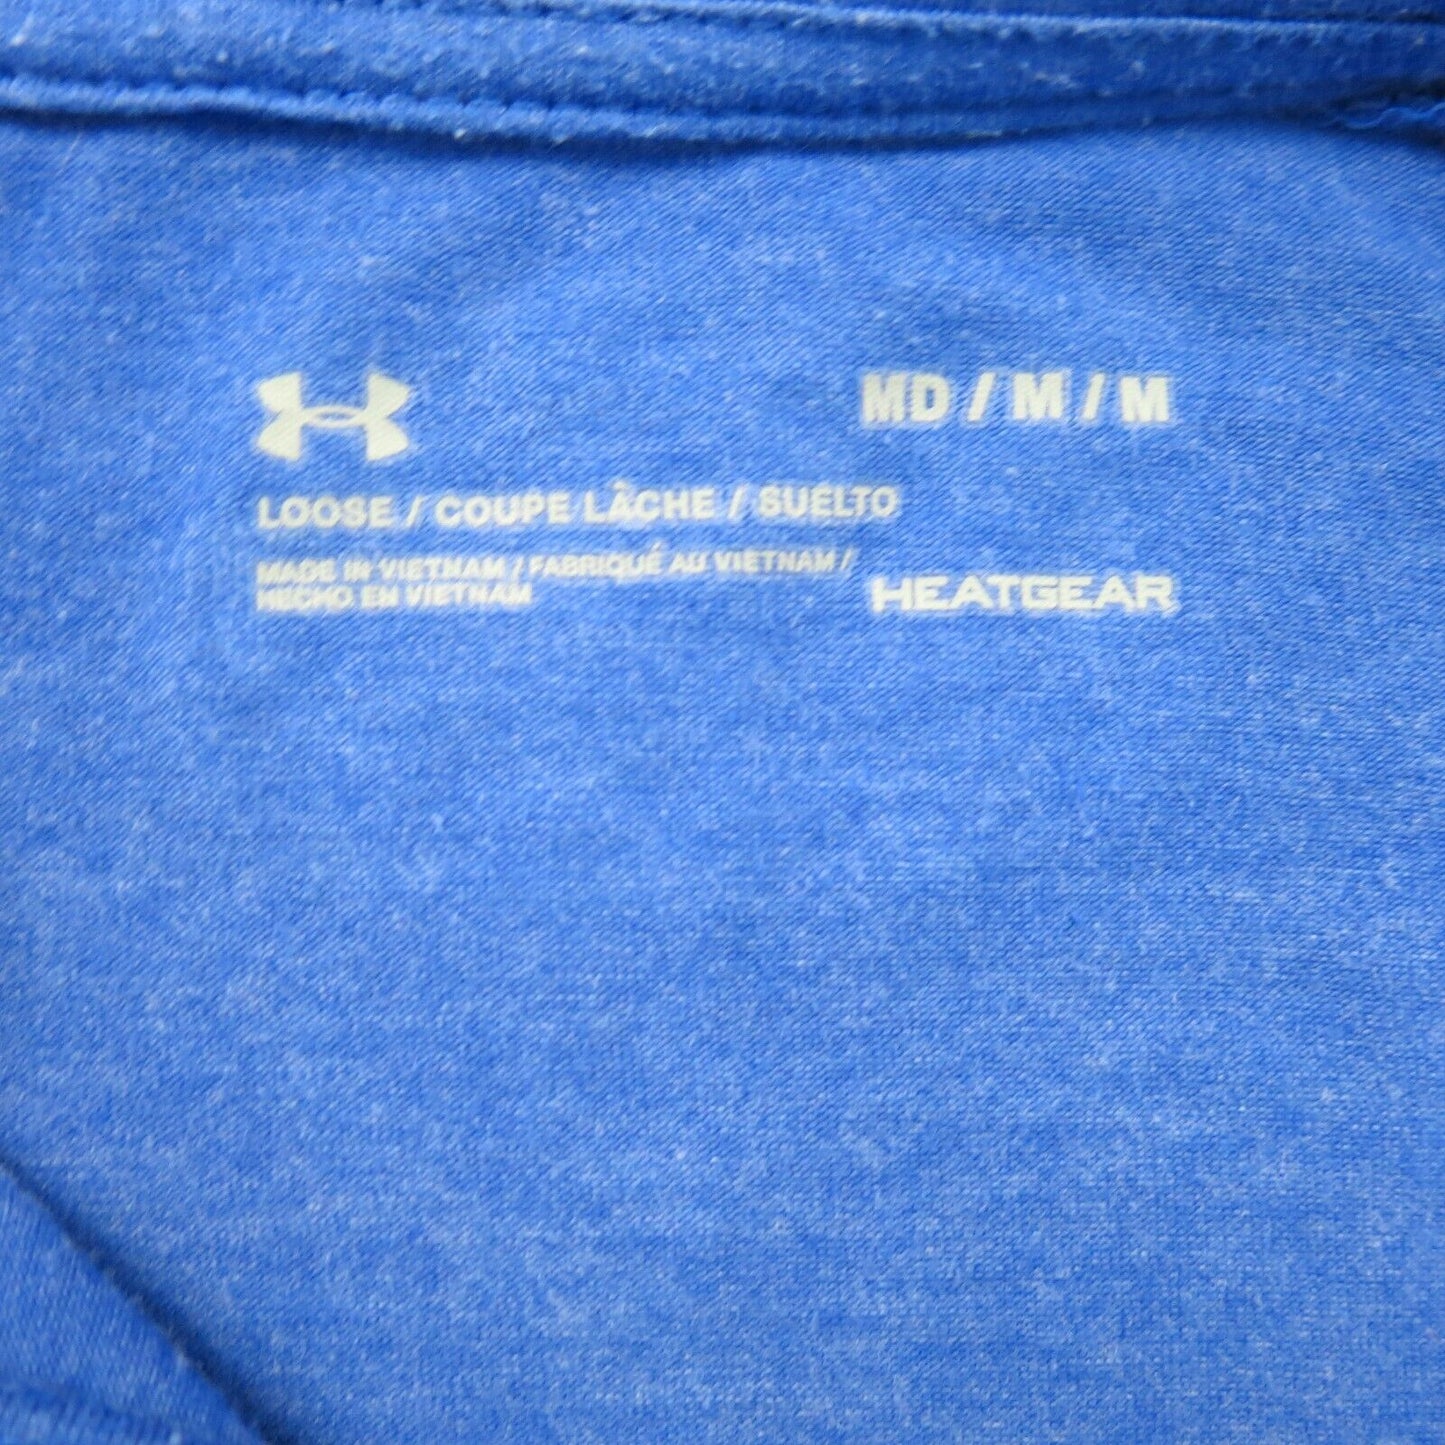 Under Armour Mens Pullover Sweatshirt Charged Loose Fit Raglan Sleeve Blue Sz M